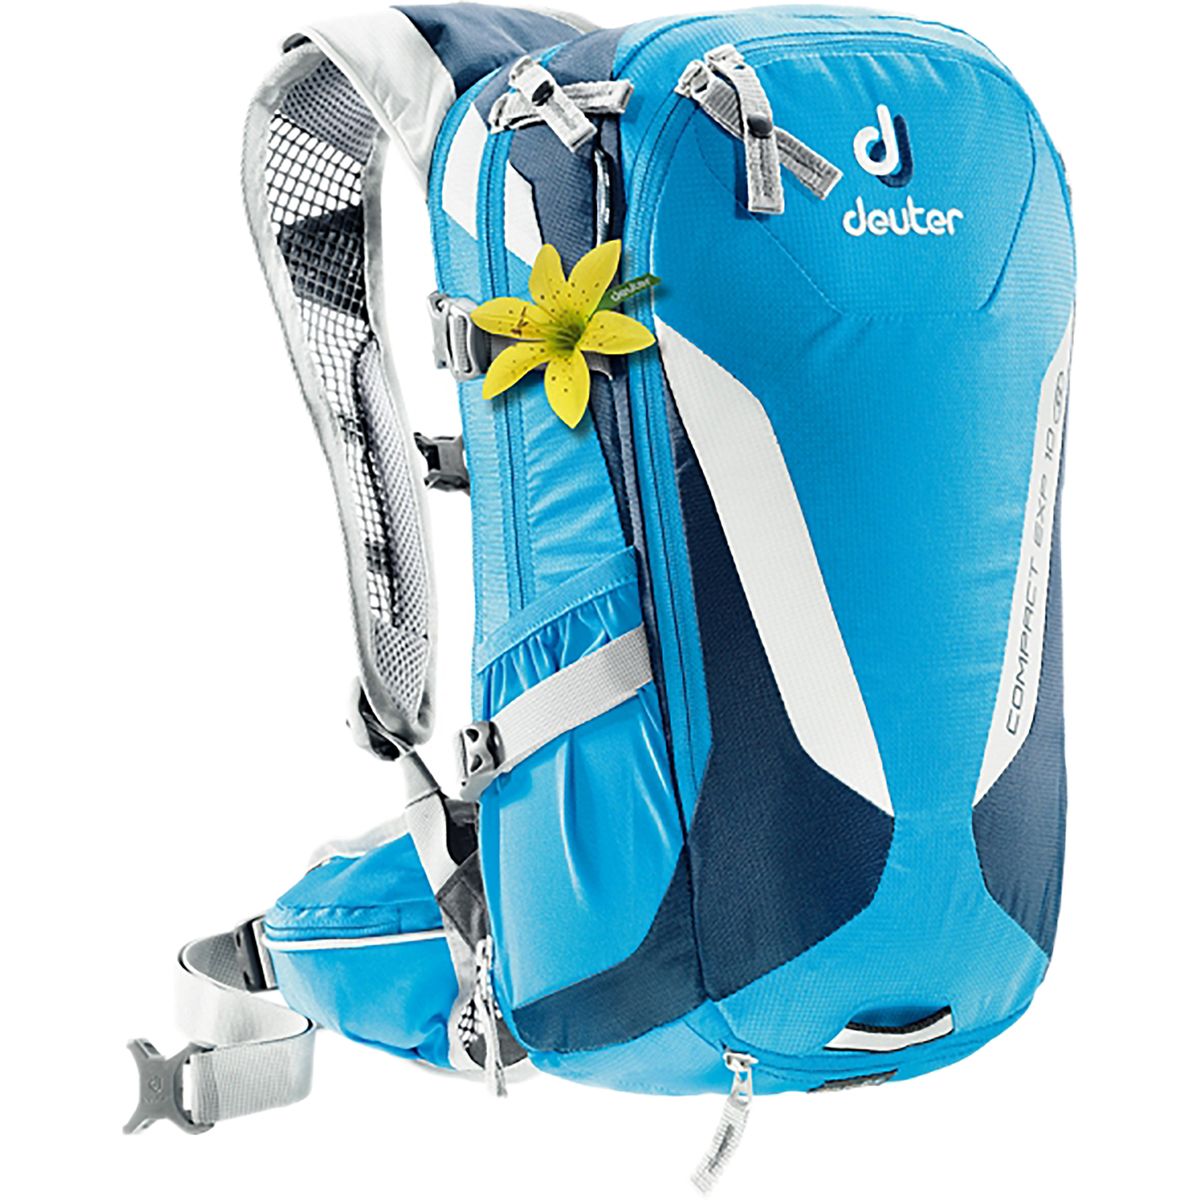 Deuter Compact EXP 10 SL Hydration Pack Women's 610cu in